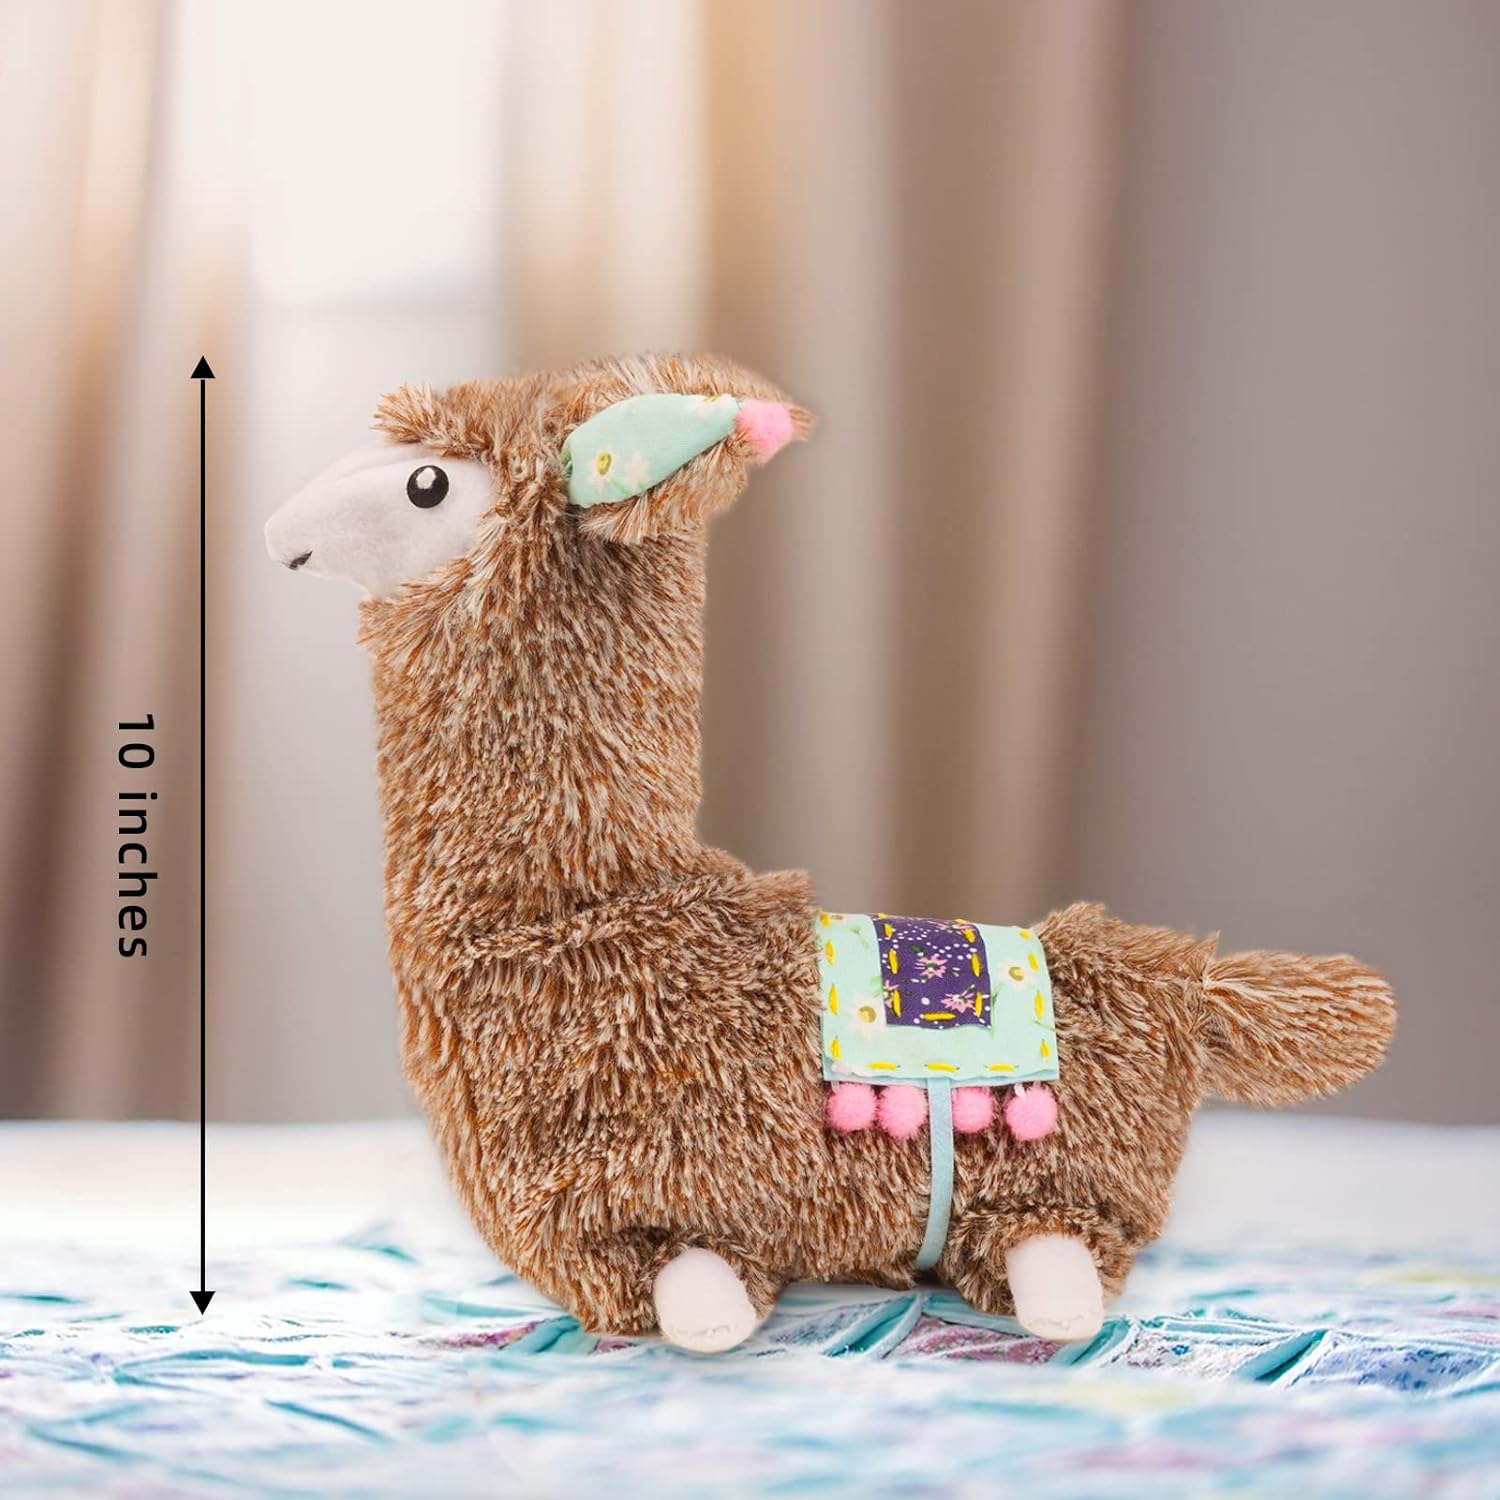 Great Choice Products Arts and Crafts for Kids Ages 8-12, Llama Sewing Kit for Kids, Make Your Own Stuffed Animal Kit, Alpaca Craft Sewing Kit